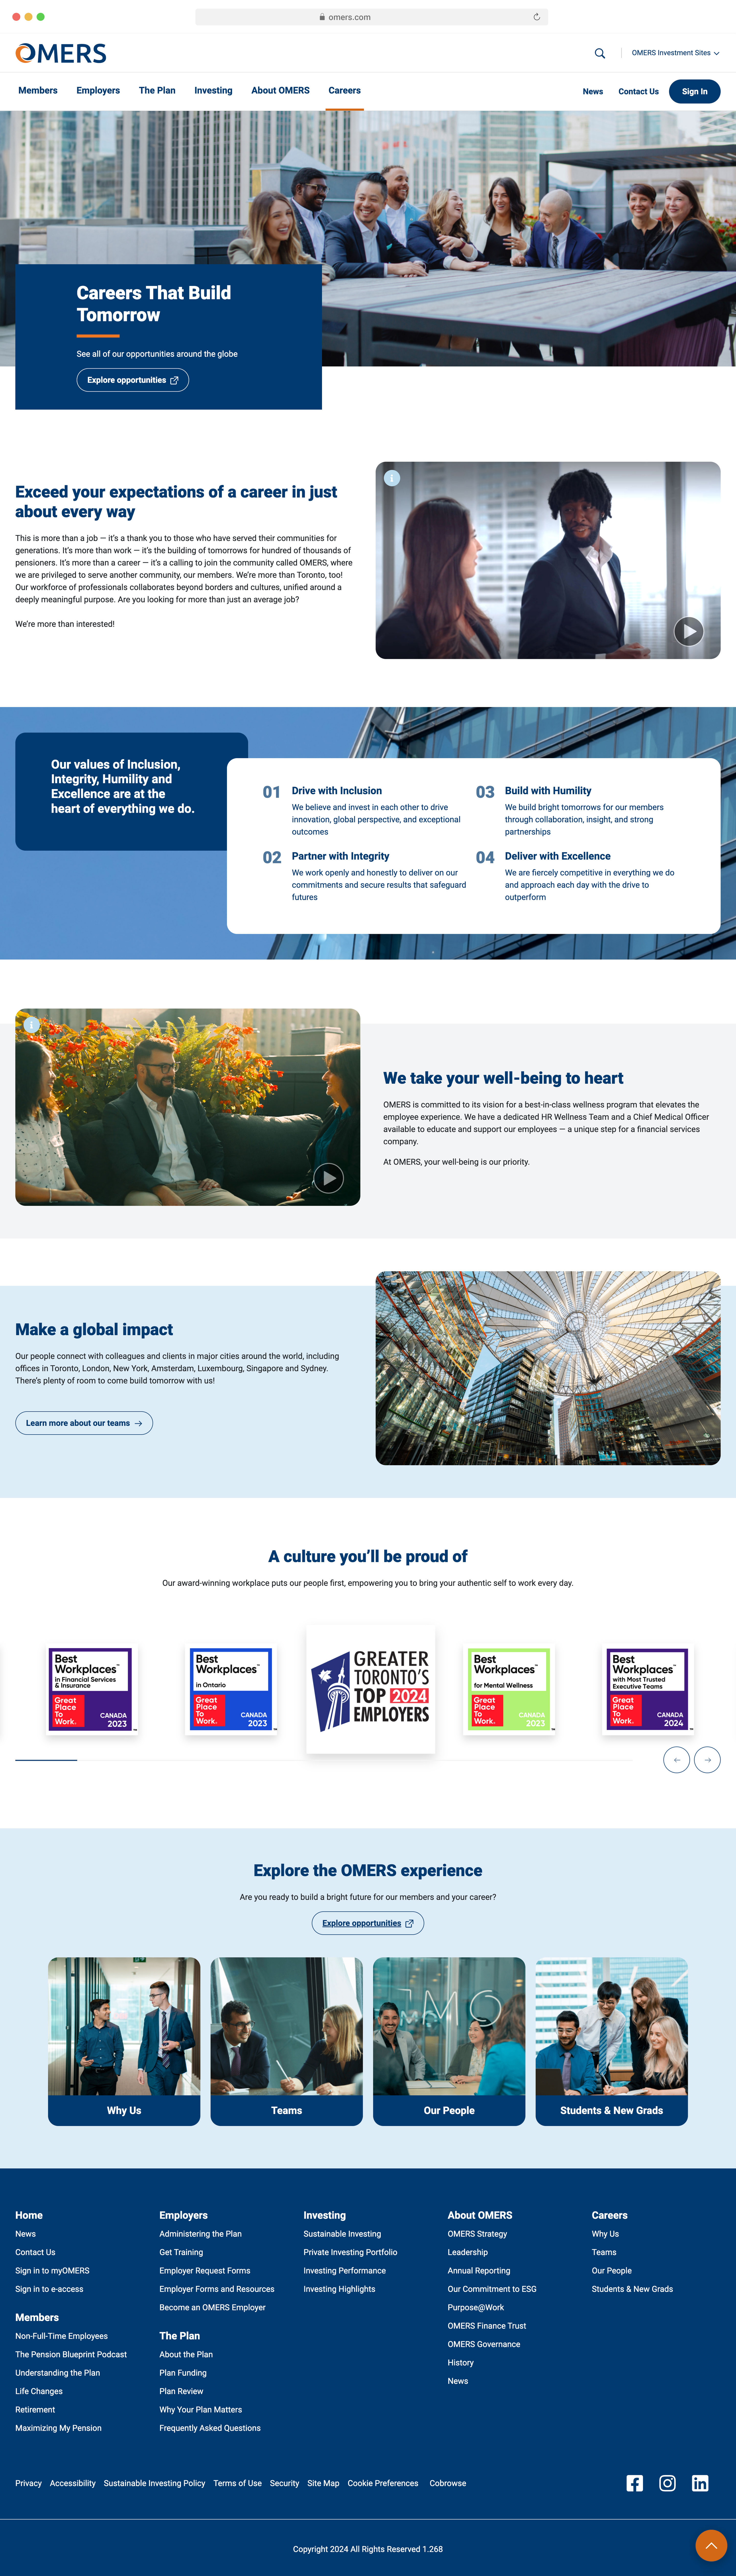 The re-envisioned OMERS careers landing page